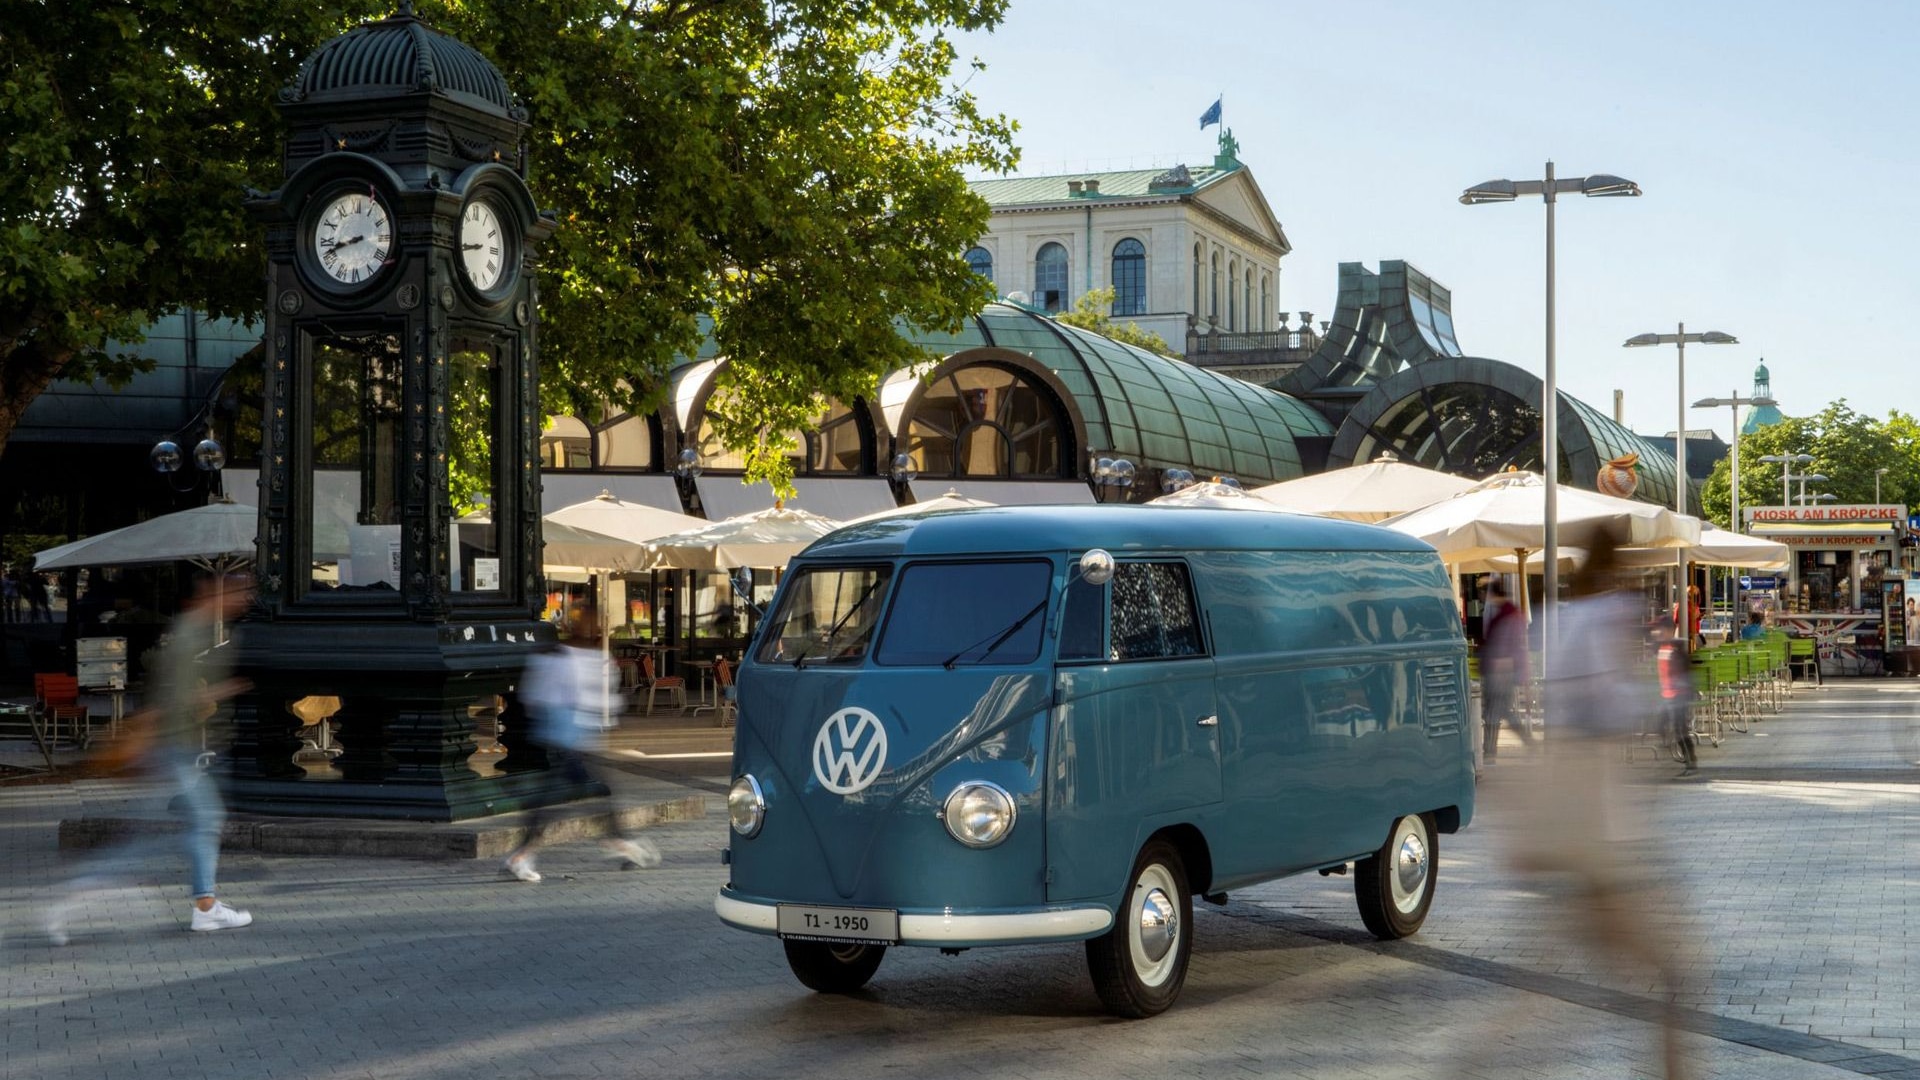 This 1950 Volkswagen Type 2 is the world's oldest Microbus